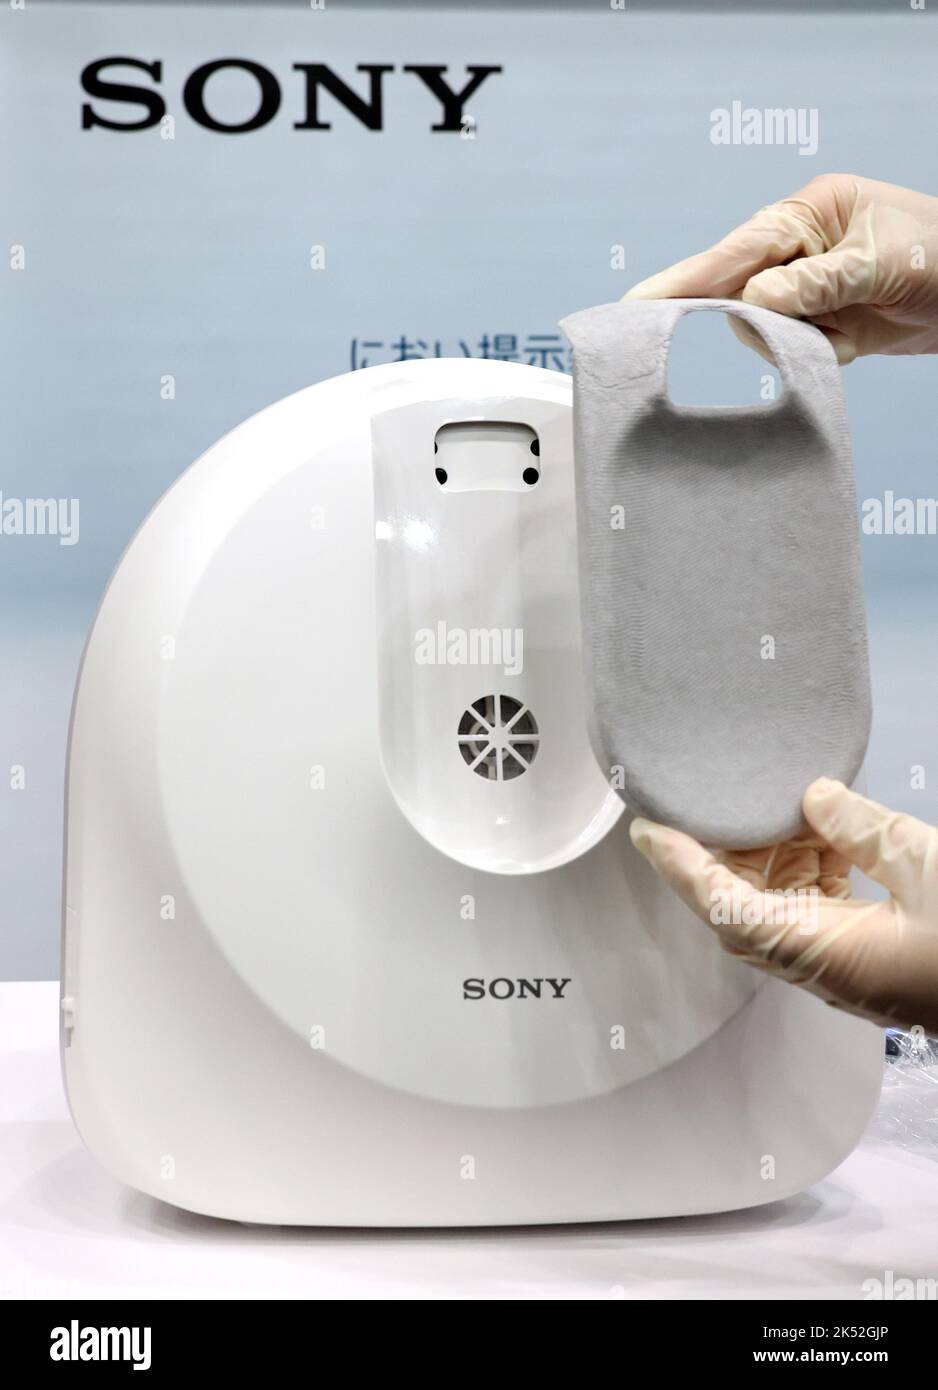 Tokyo, Japan. 5th Oct, 2022. Japanese electronics giant Sony unveils the new olfactometry machine 'NOS-DX1000' which has 40 cartridges of odorous substance such as flowers, fruits, and foods at the company's headquarters in Tokyo on Wednesday, October 5, 2022. The olfactometry system will put it on the market next Spring for medical institutes, laboratories to measure the sense of olfactory. Credit: Yoshio Tsunoda/AFLO/Alamy Live News Stock Photo